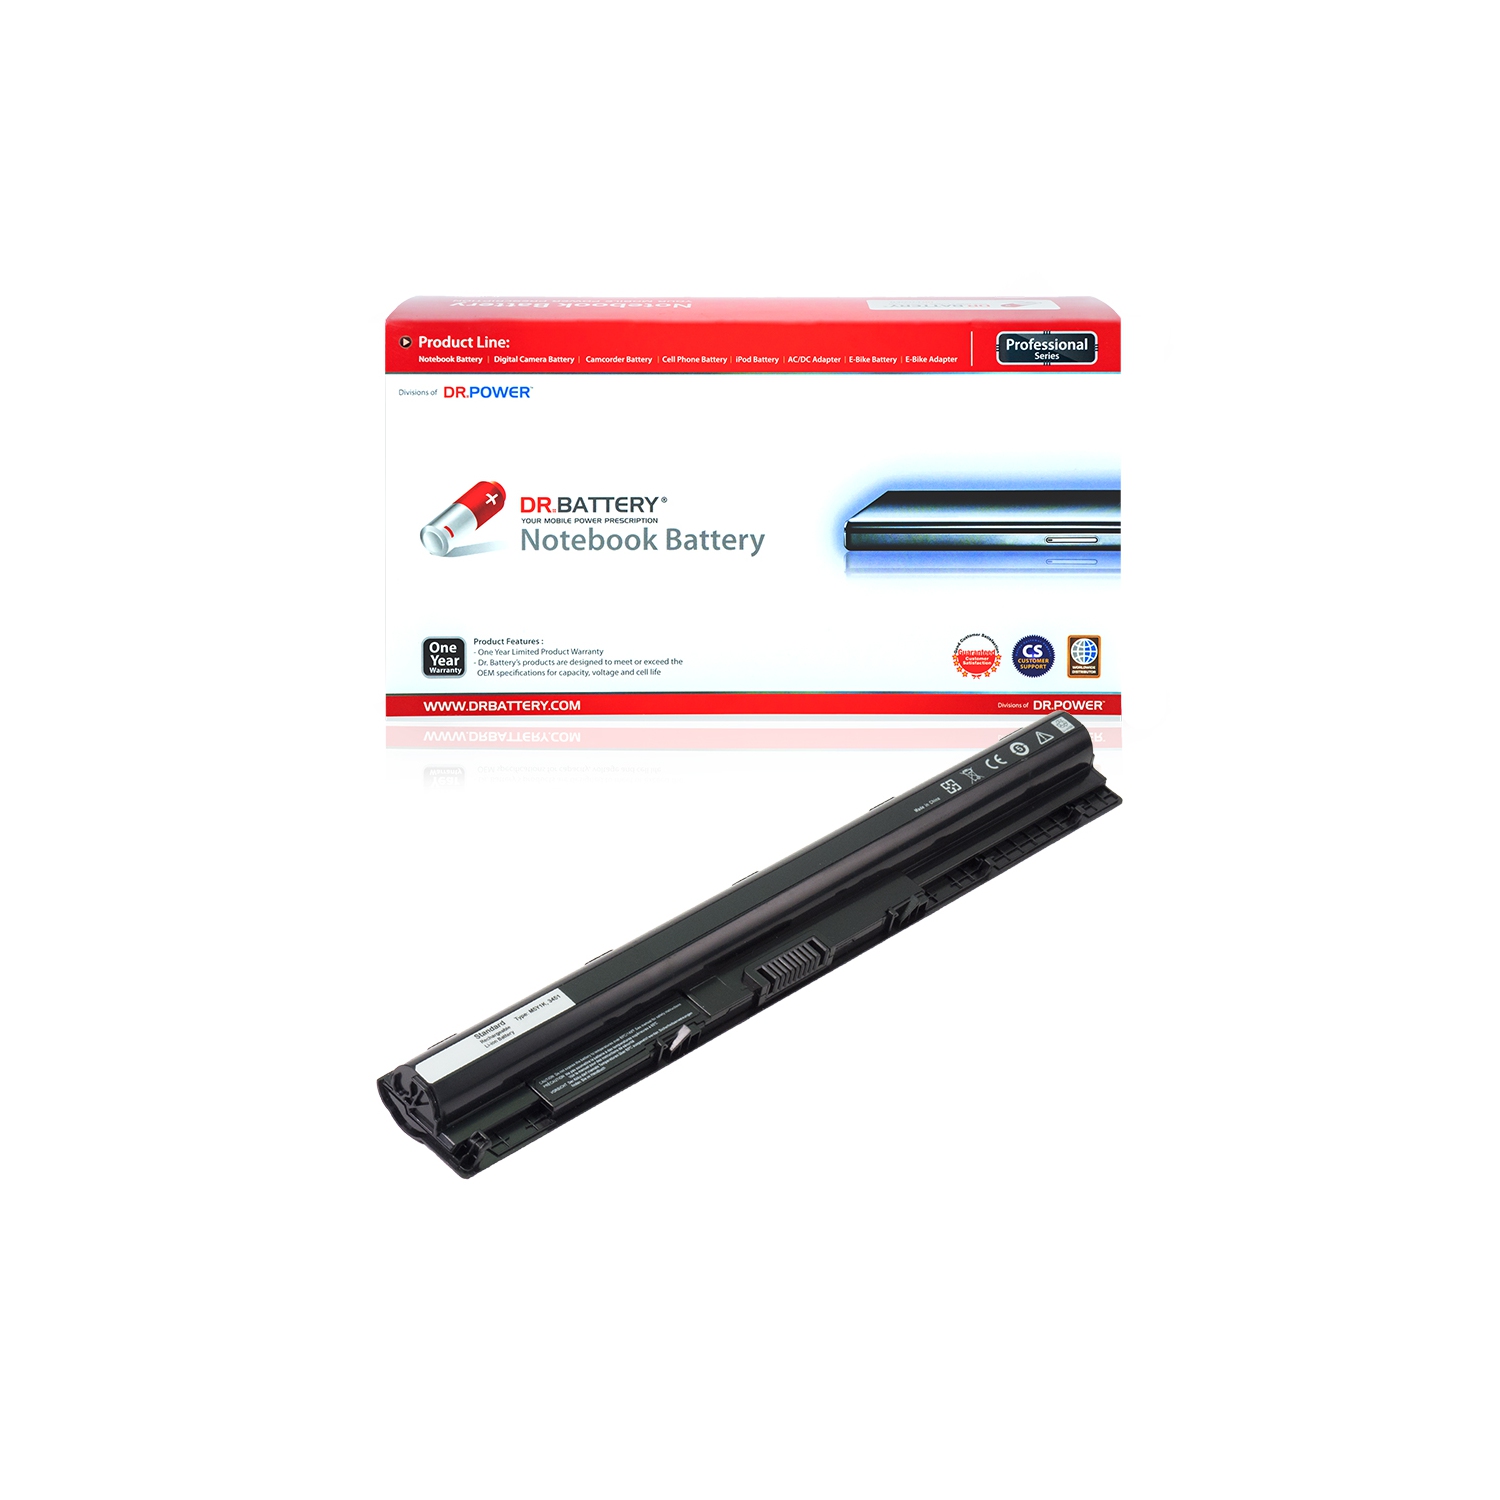 DR. BATTERY - Replacement for Dell Inspiron 14-3462 / 14-3465 / 14-3467 / 14-5000 / 14-5451 / M5YIK / P28E / P60G / P60G001